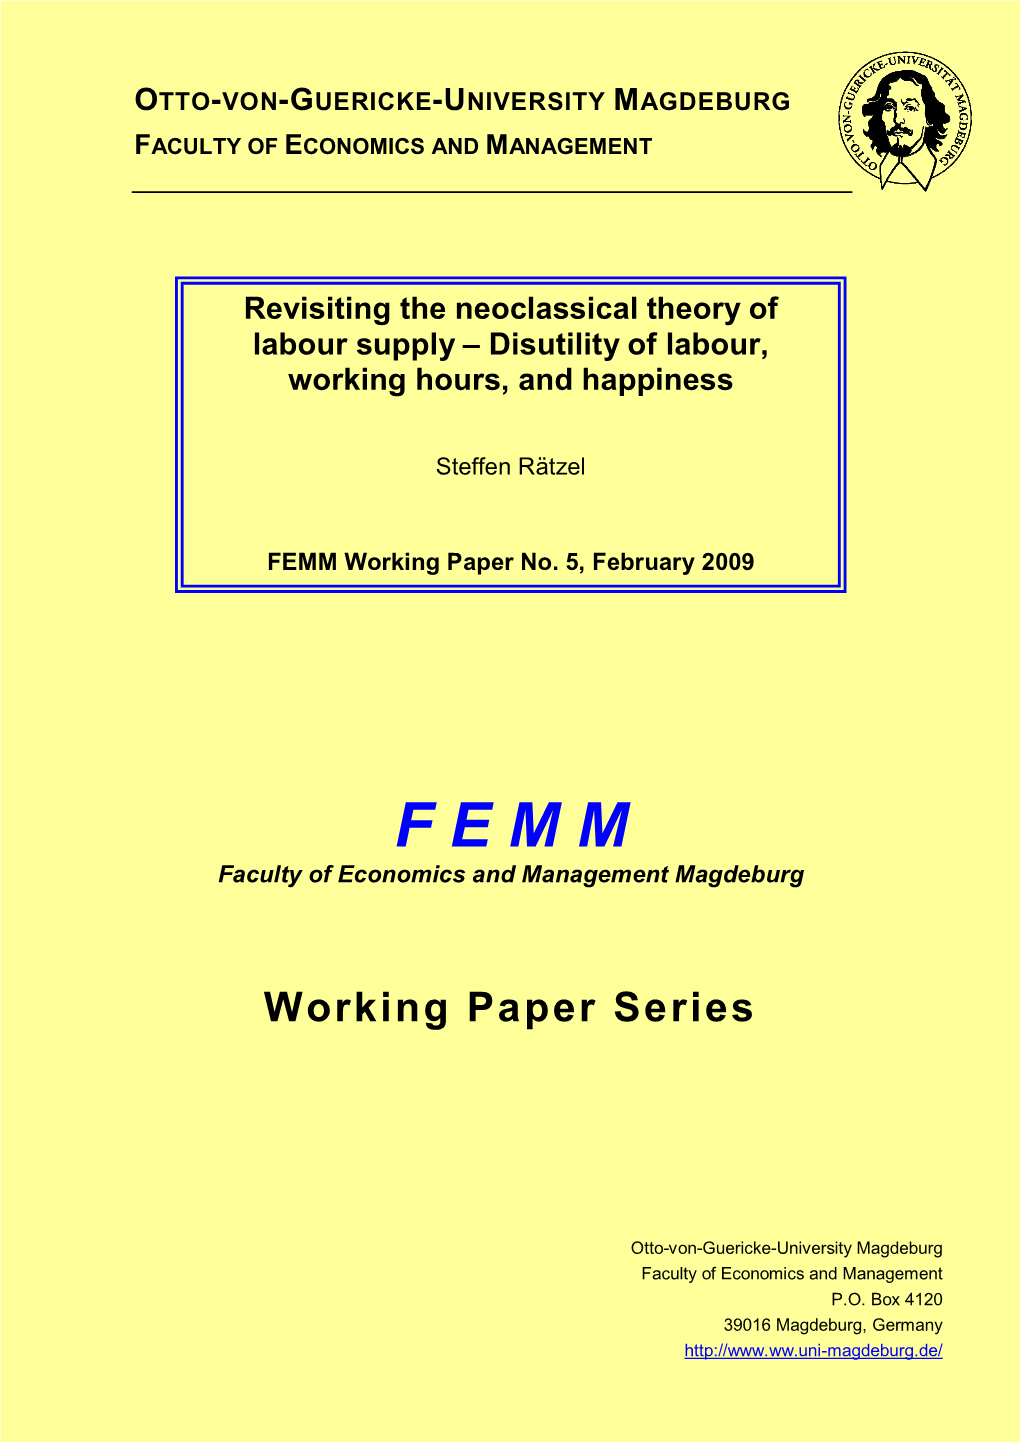 Revisiting the Neoclassical Theory of Labour Supply – Disutility of Labour, Working Hours, and Happiness